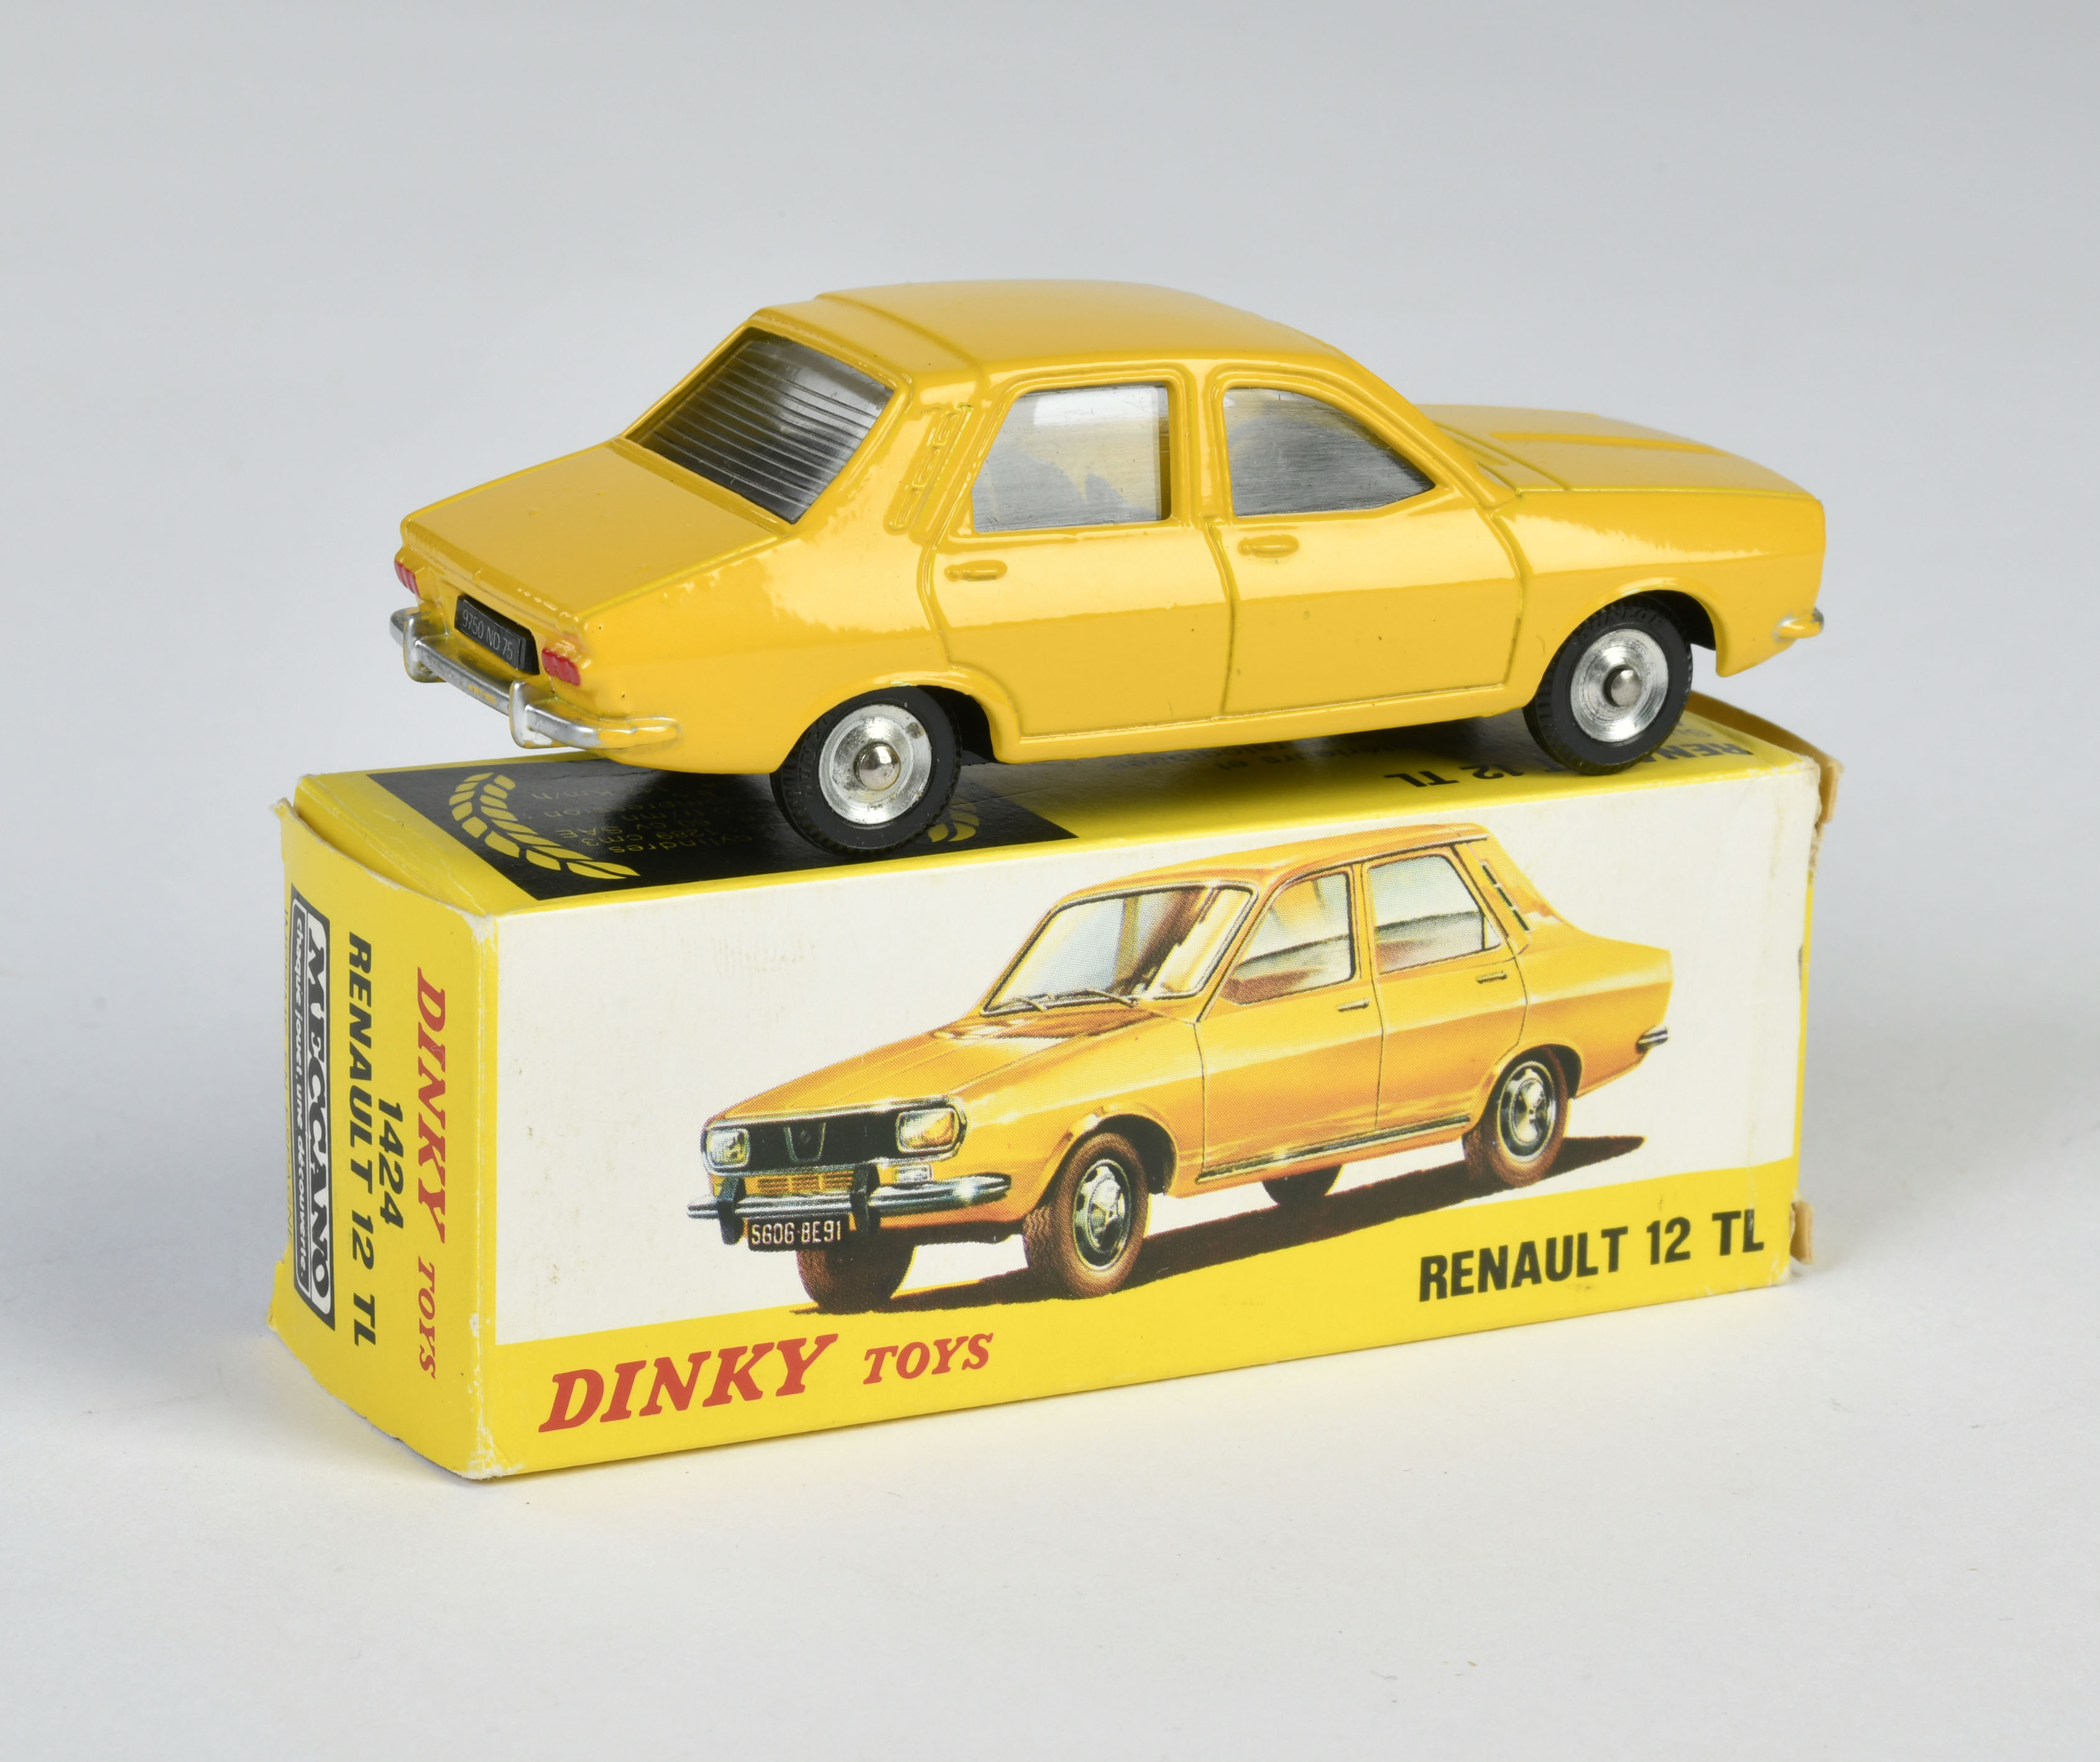 Dinky Toys, 1424 Renault 12, yellow, box C 2, C 1 - Image 2 of 2